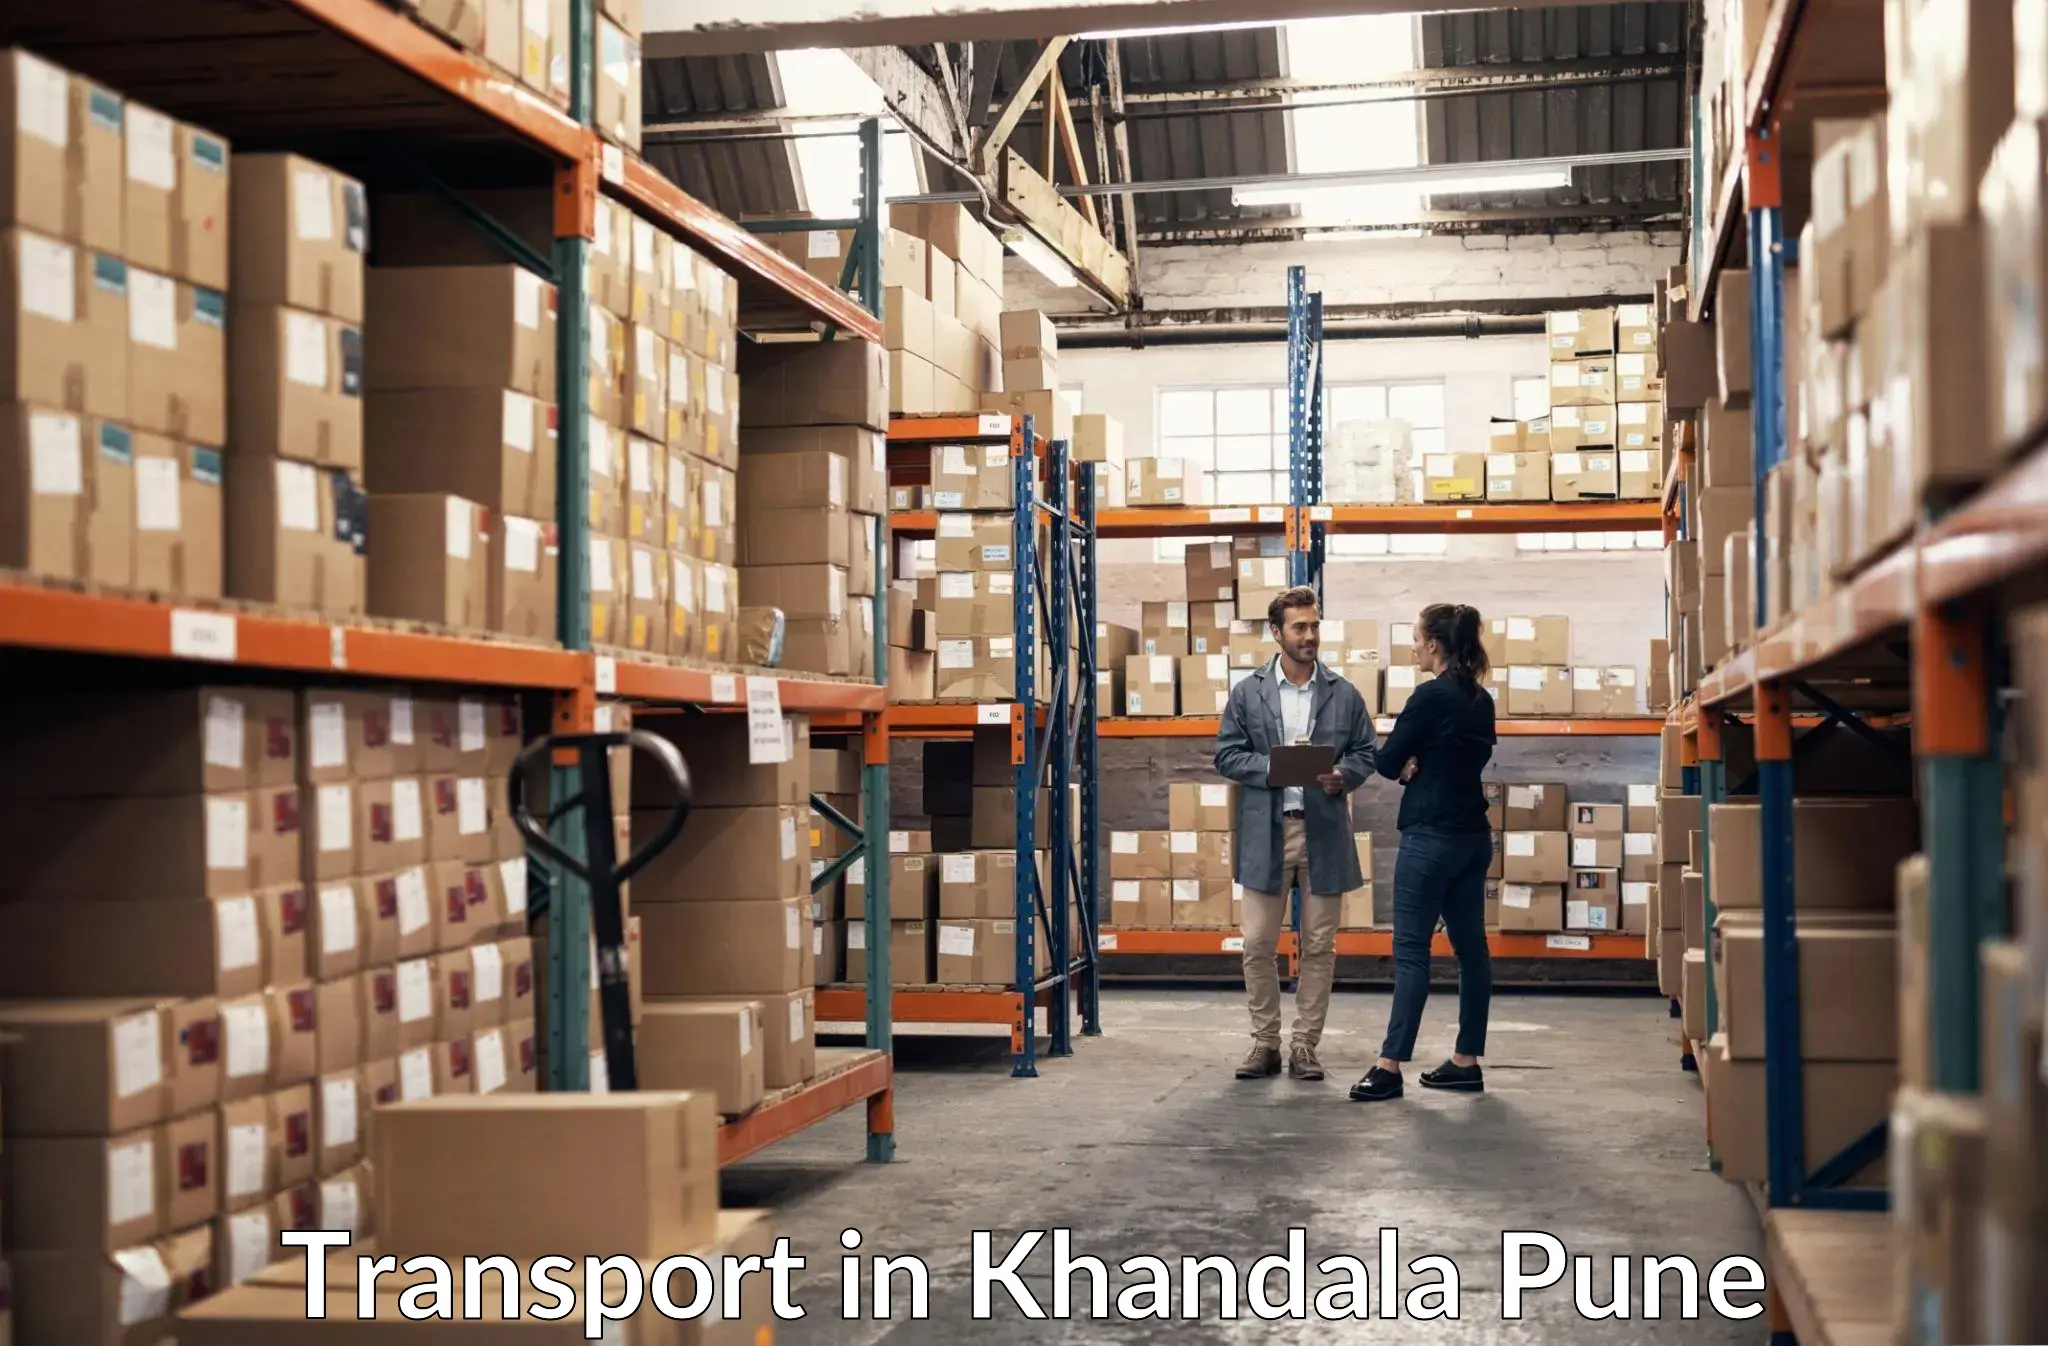 Container transport service in Khandala Pune